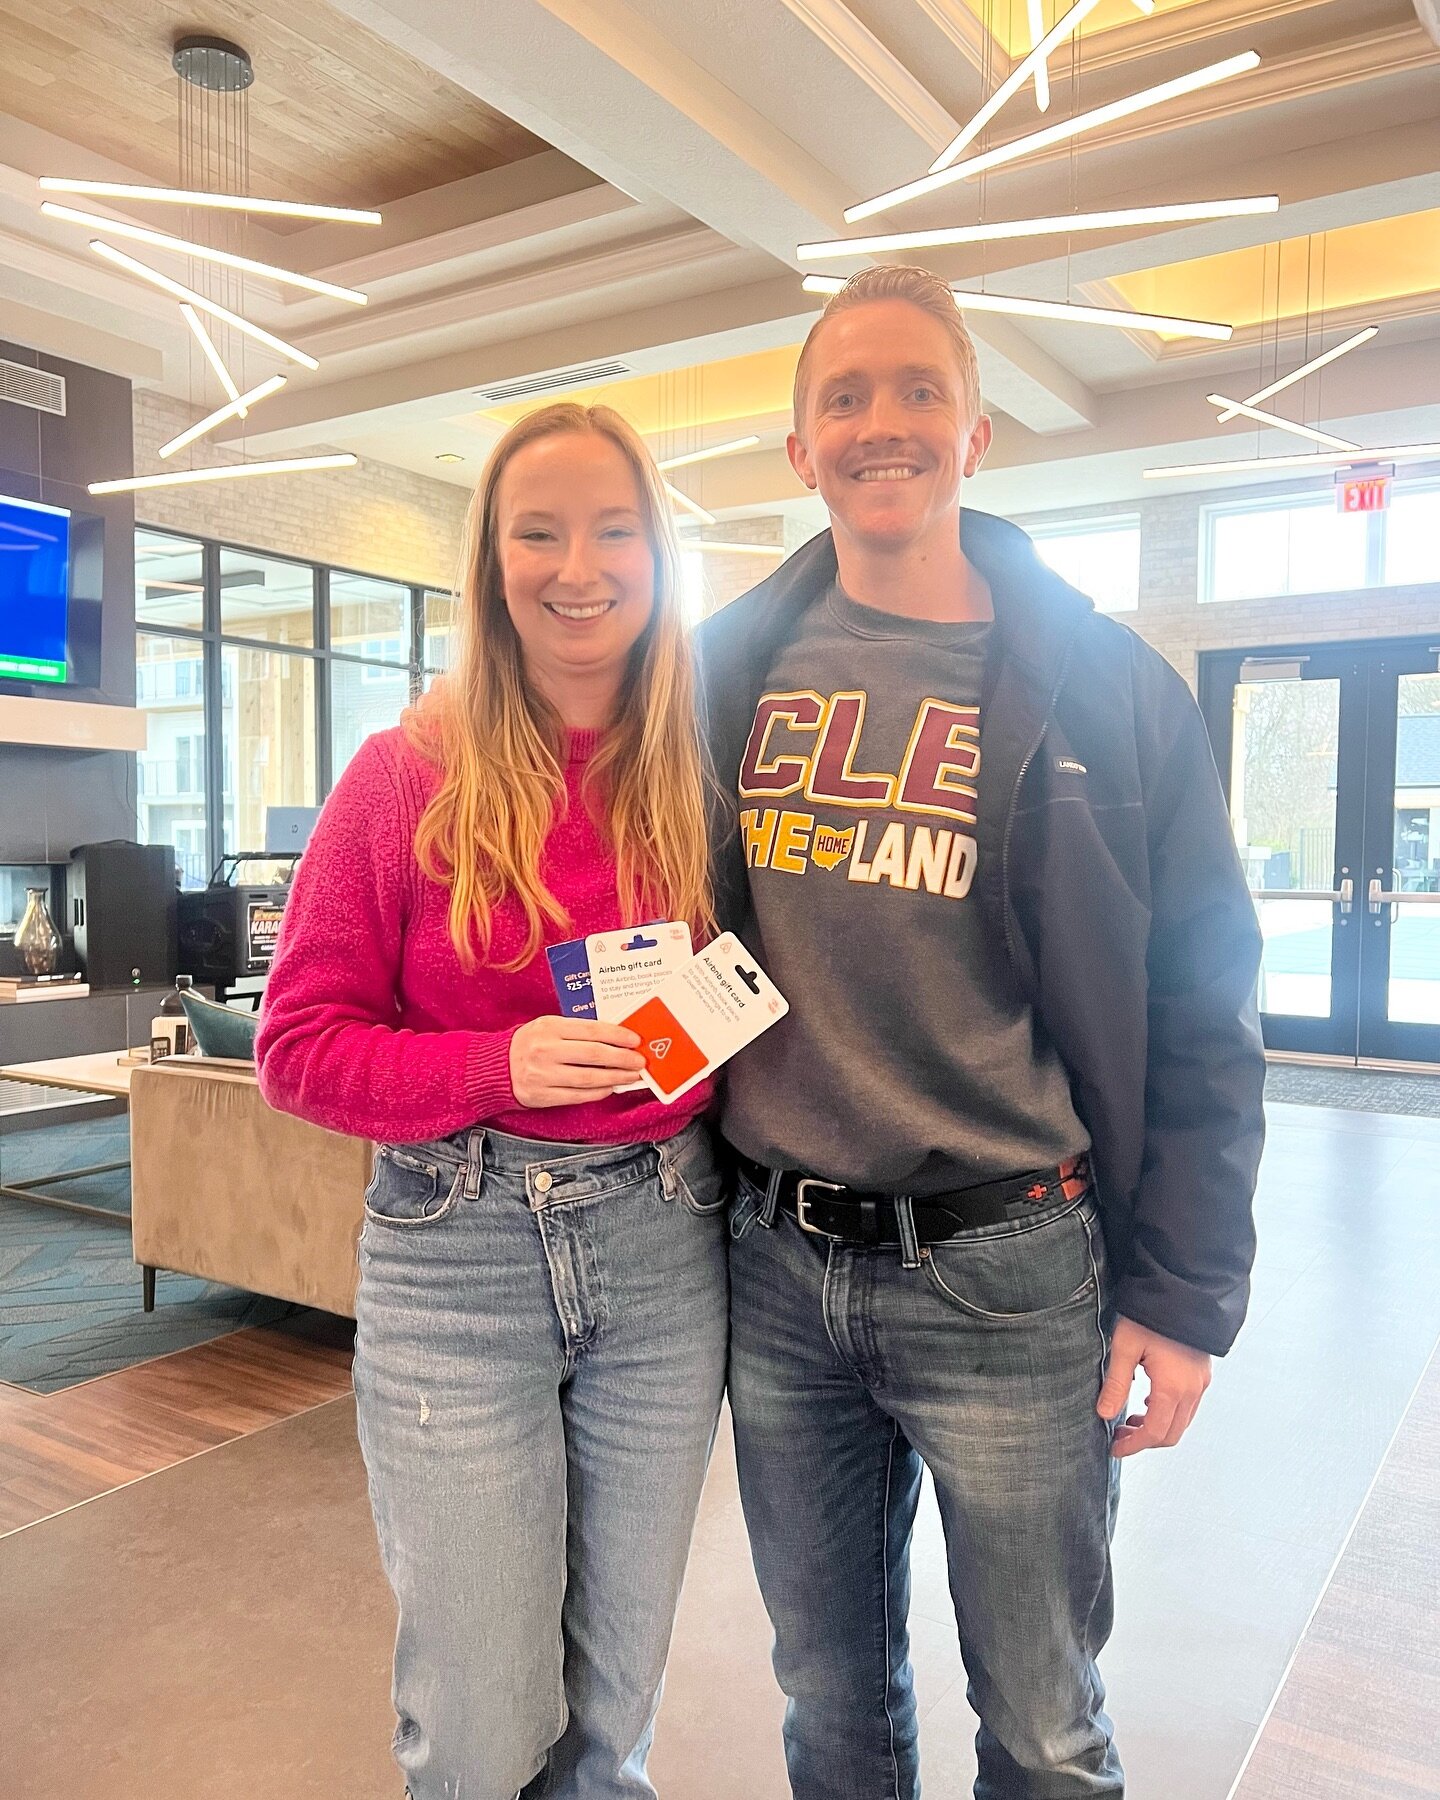 Can we get a round of applause for our trivia and tour grand prize winners, Alan and Meghan! ✨ We hope you have the best weekend getaway ever!